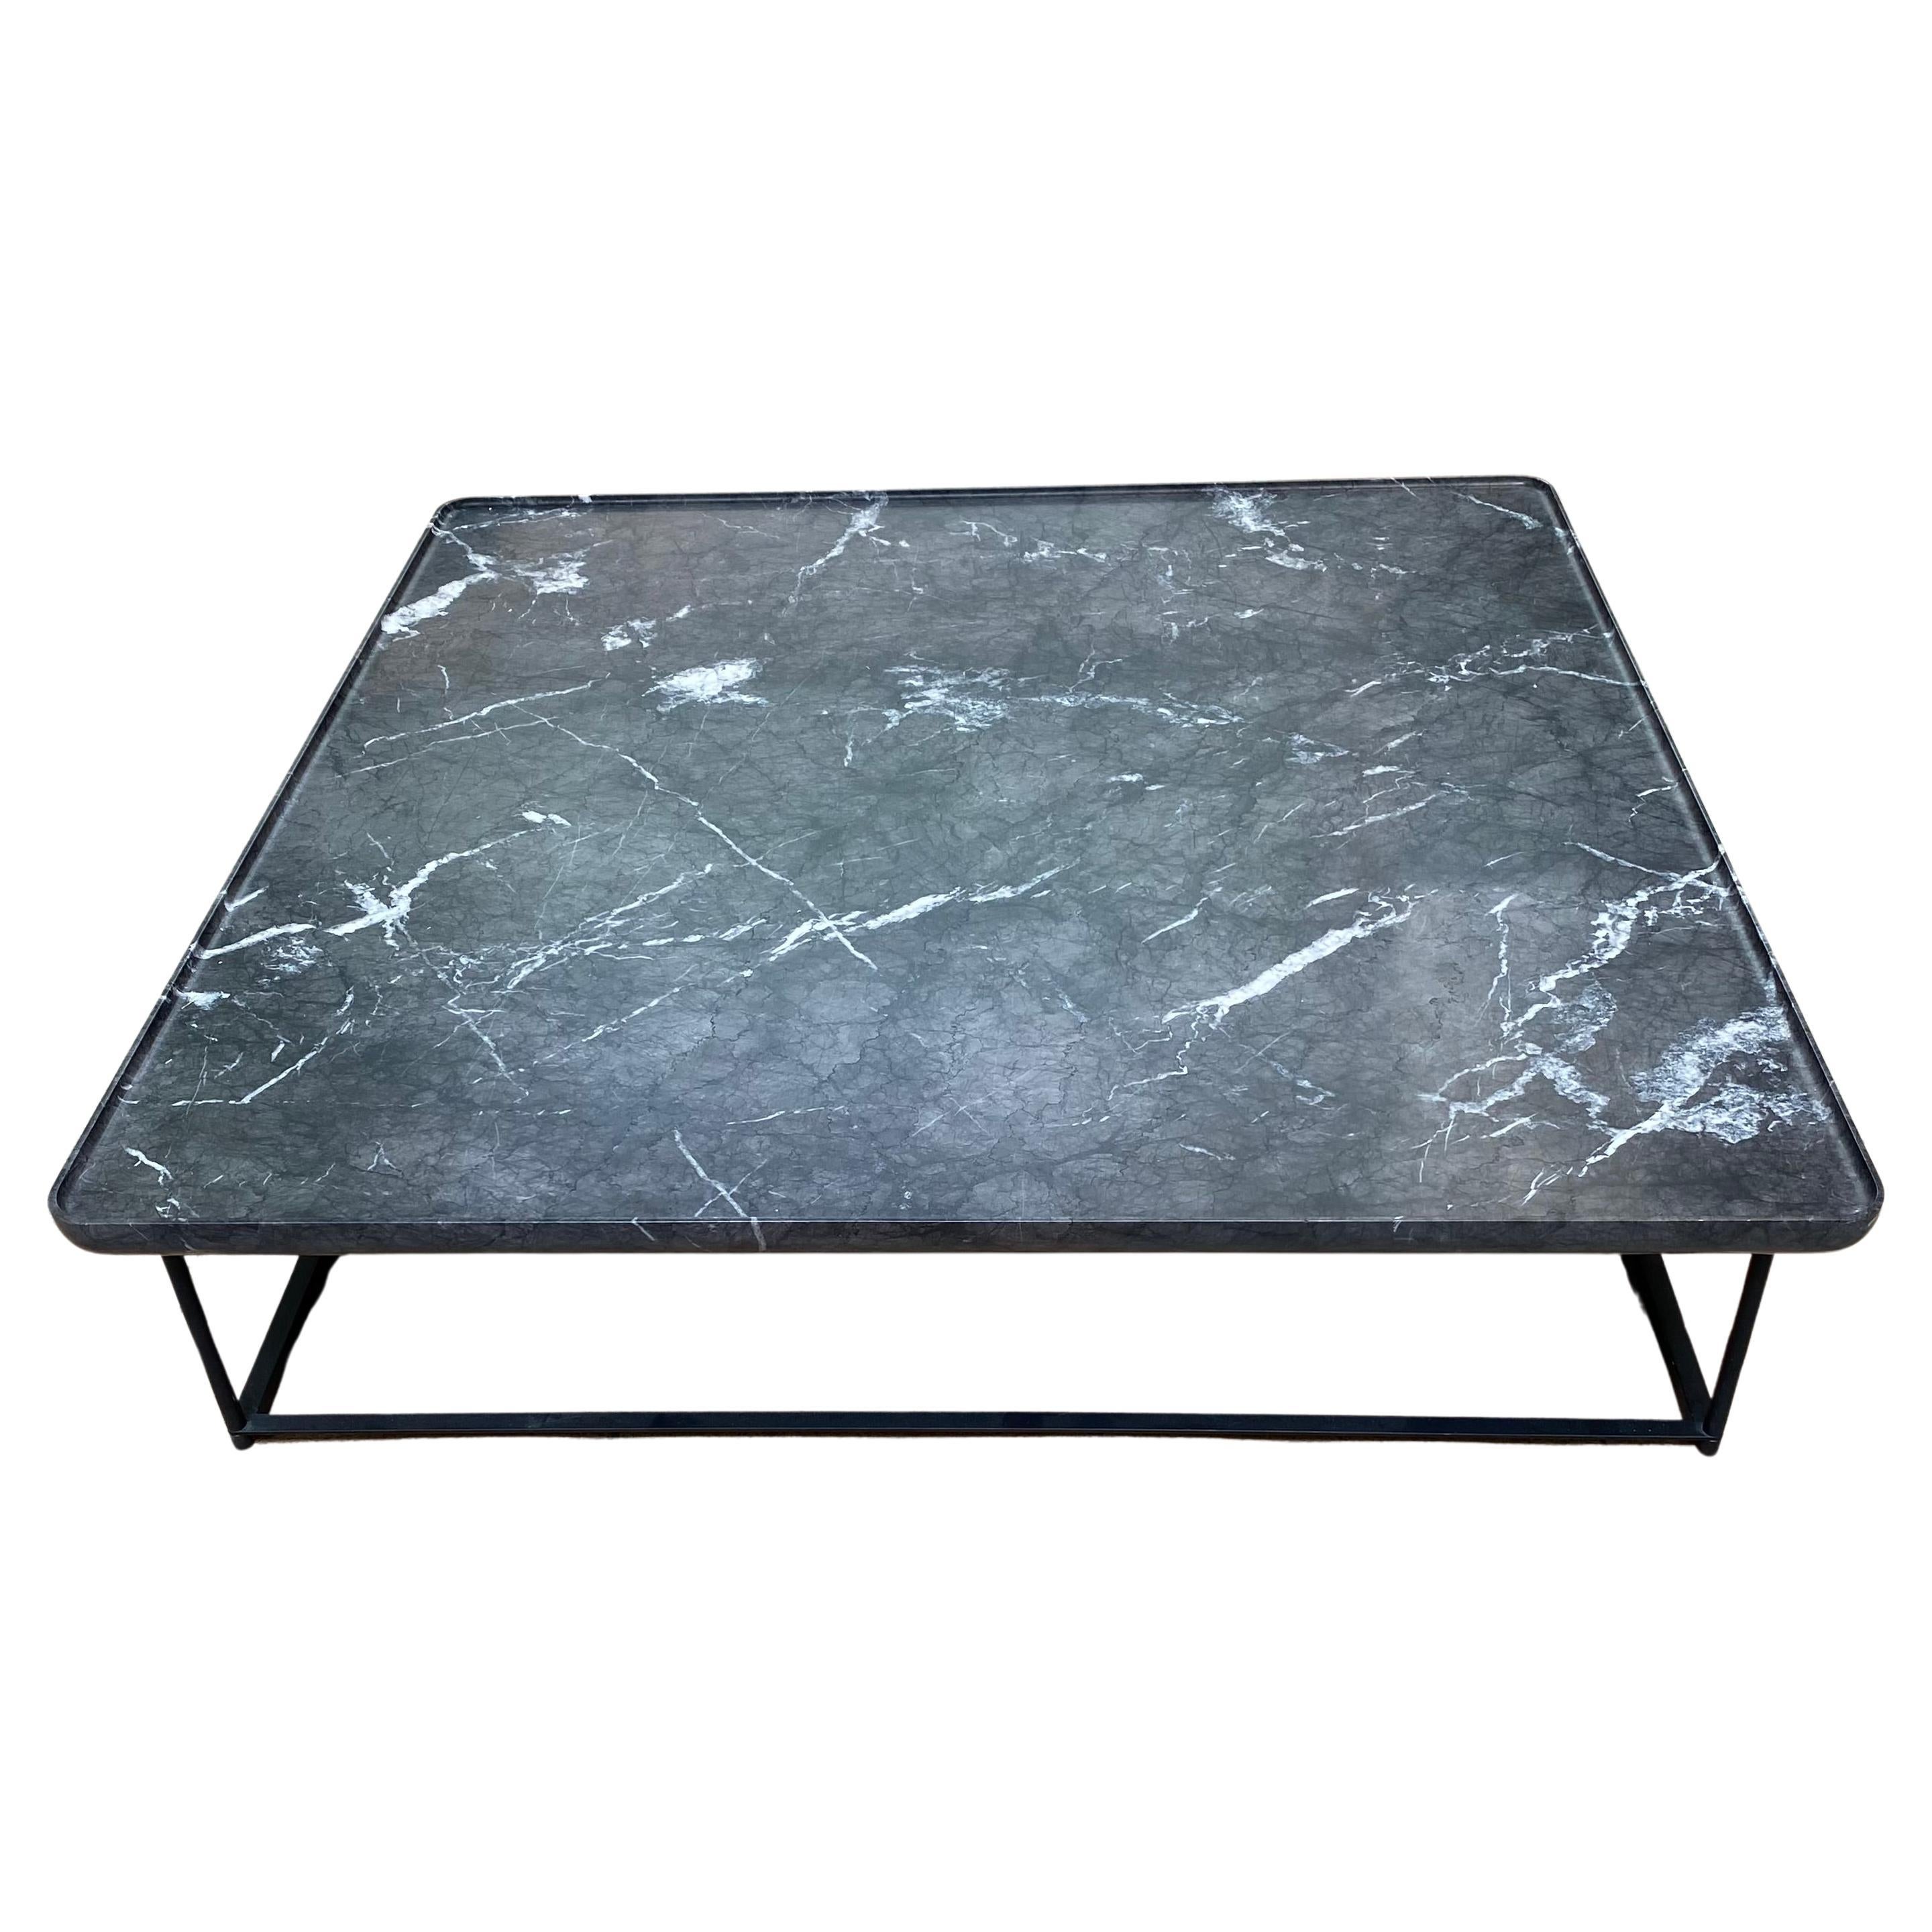 Torei Square Table Grey Carnico Marble - Cassina For Sale